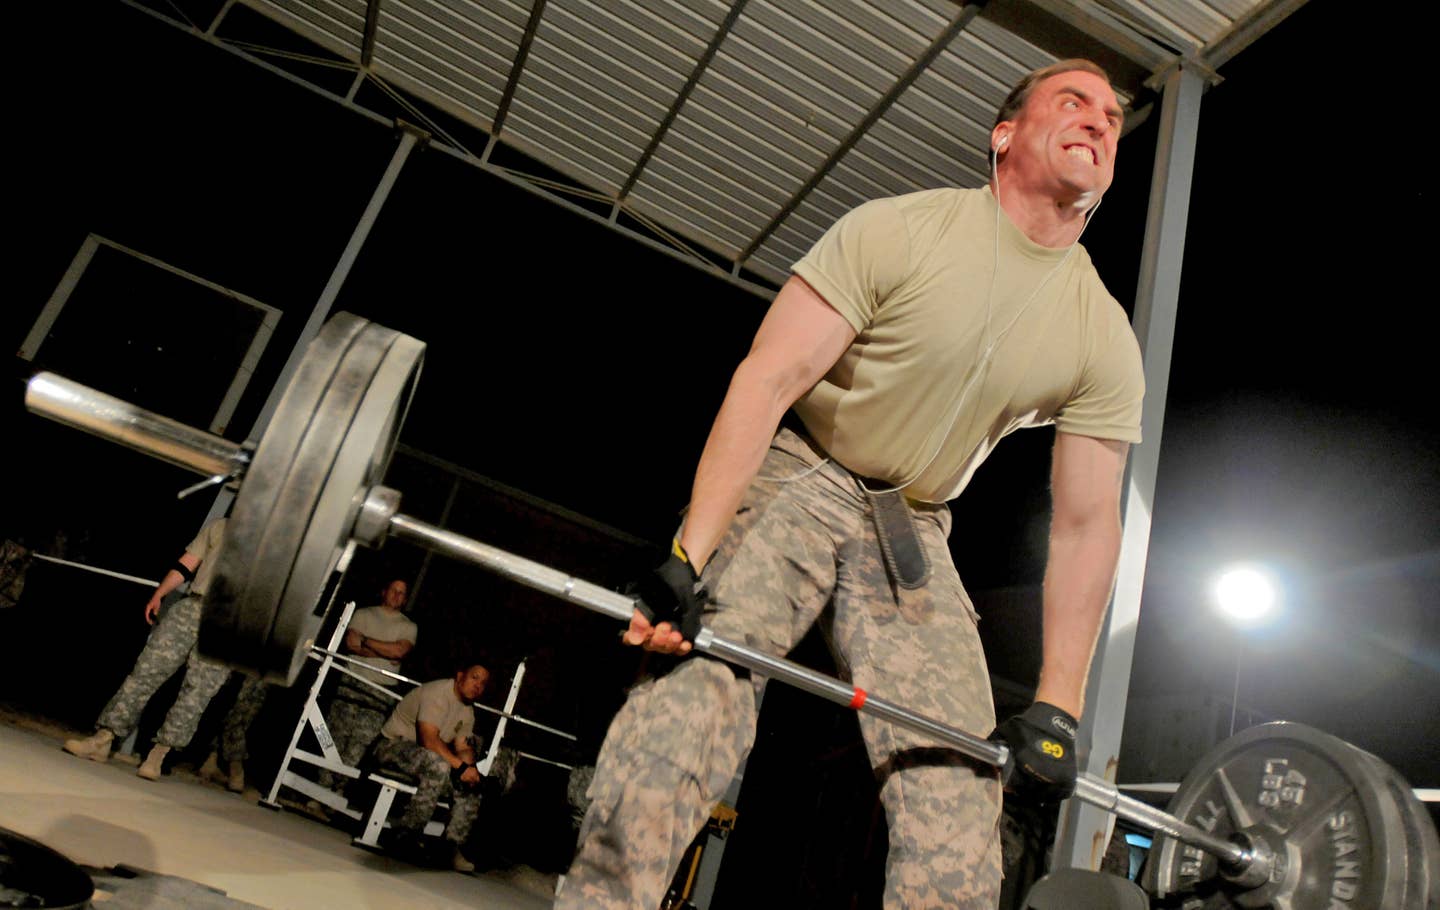 6 stereotypes you&#8217;ll see in every military gym